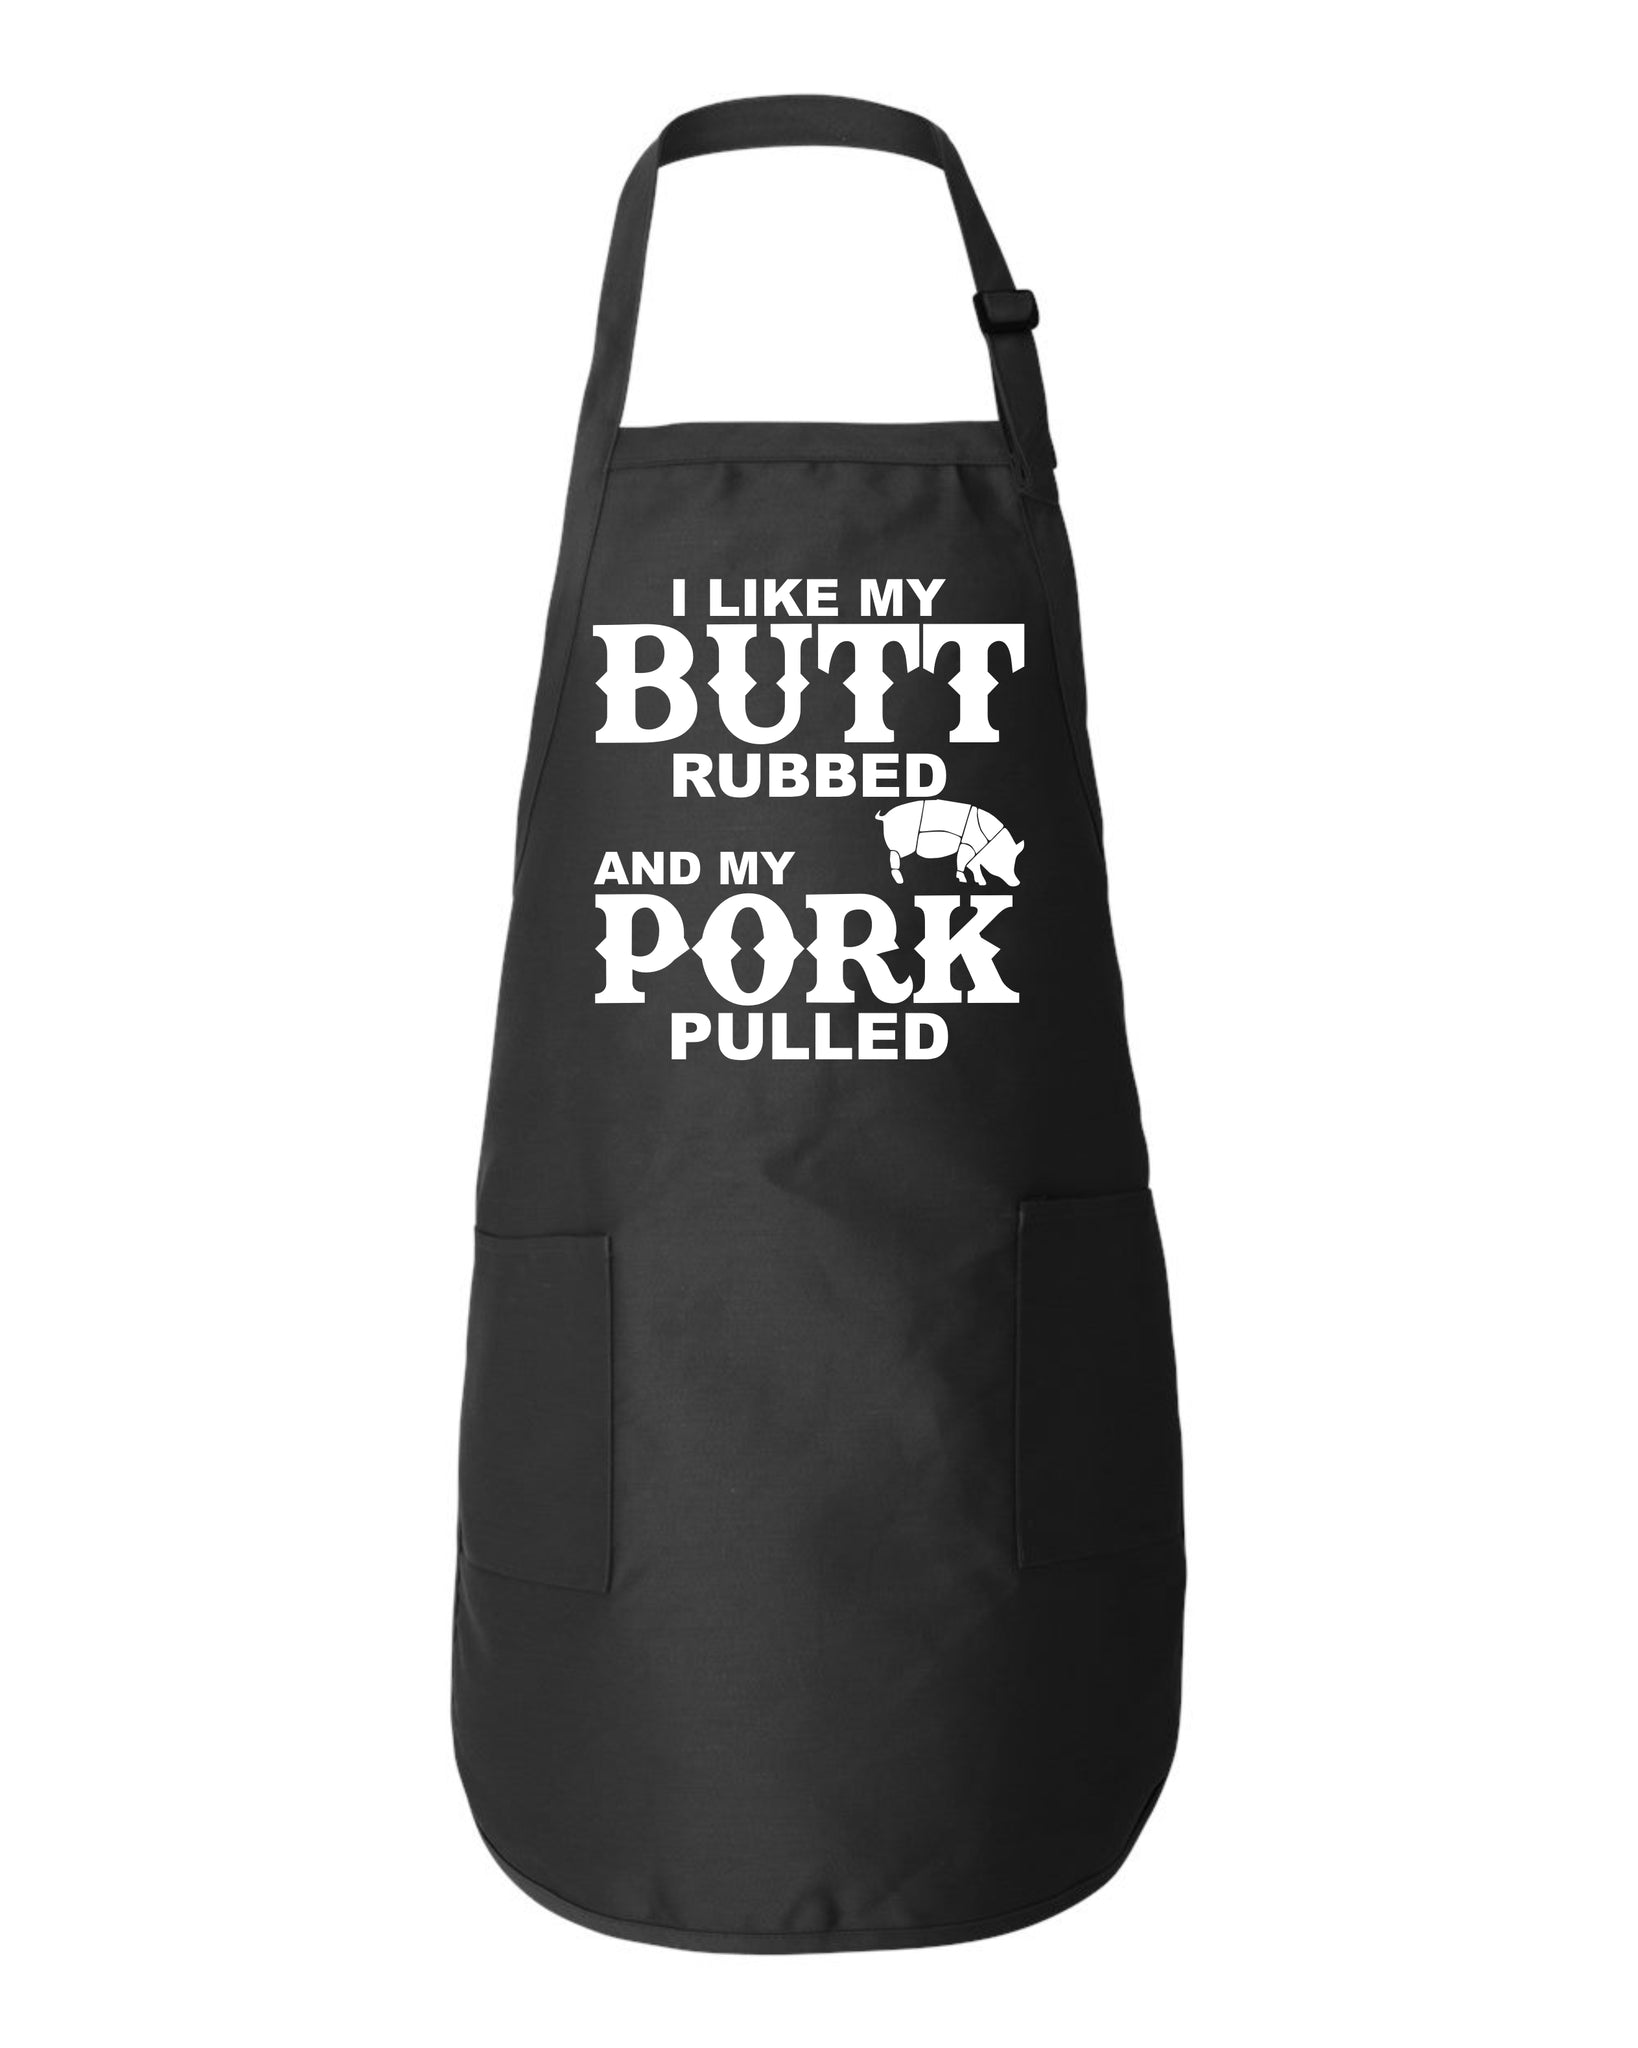 I Like My Butt Rubbed And My Pork Pulled Funny Kitchen Apron BBQ Funny Gift Father's Day Mother's Day